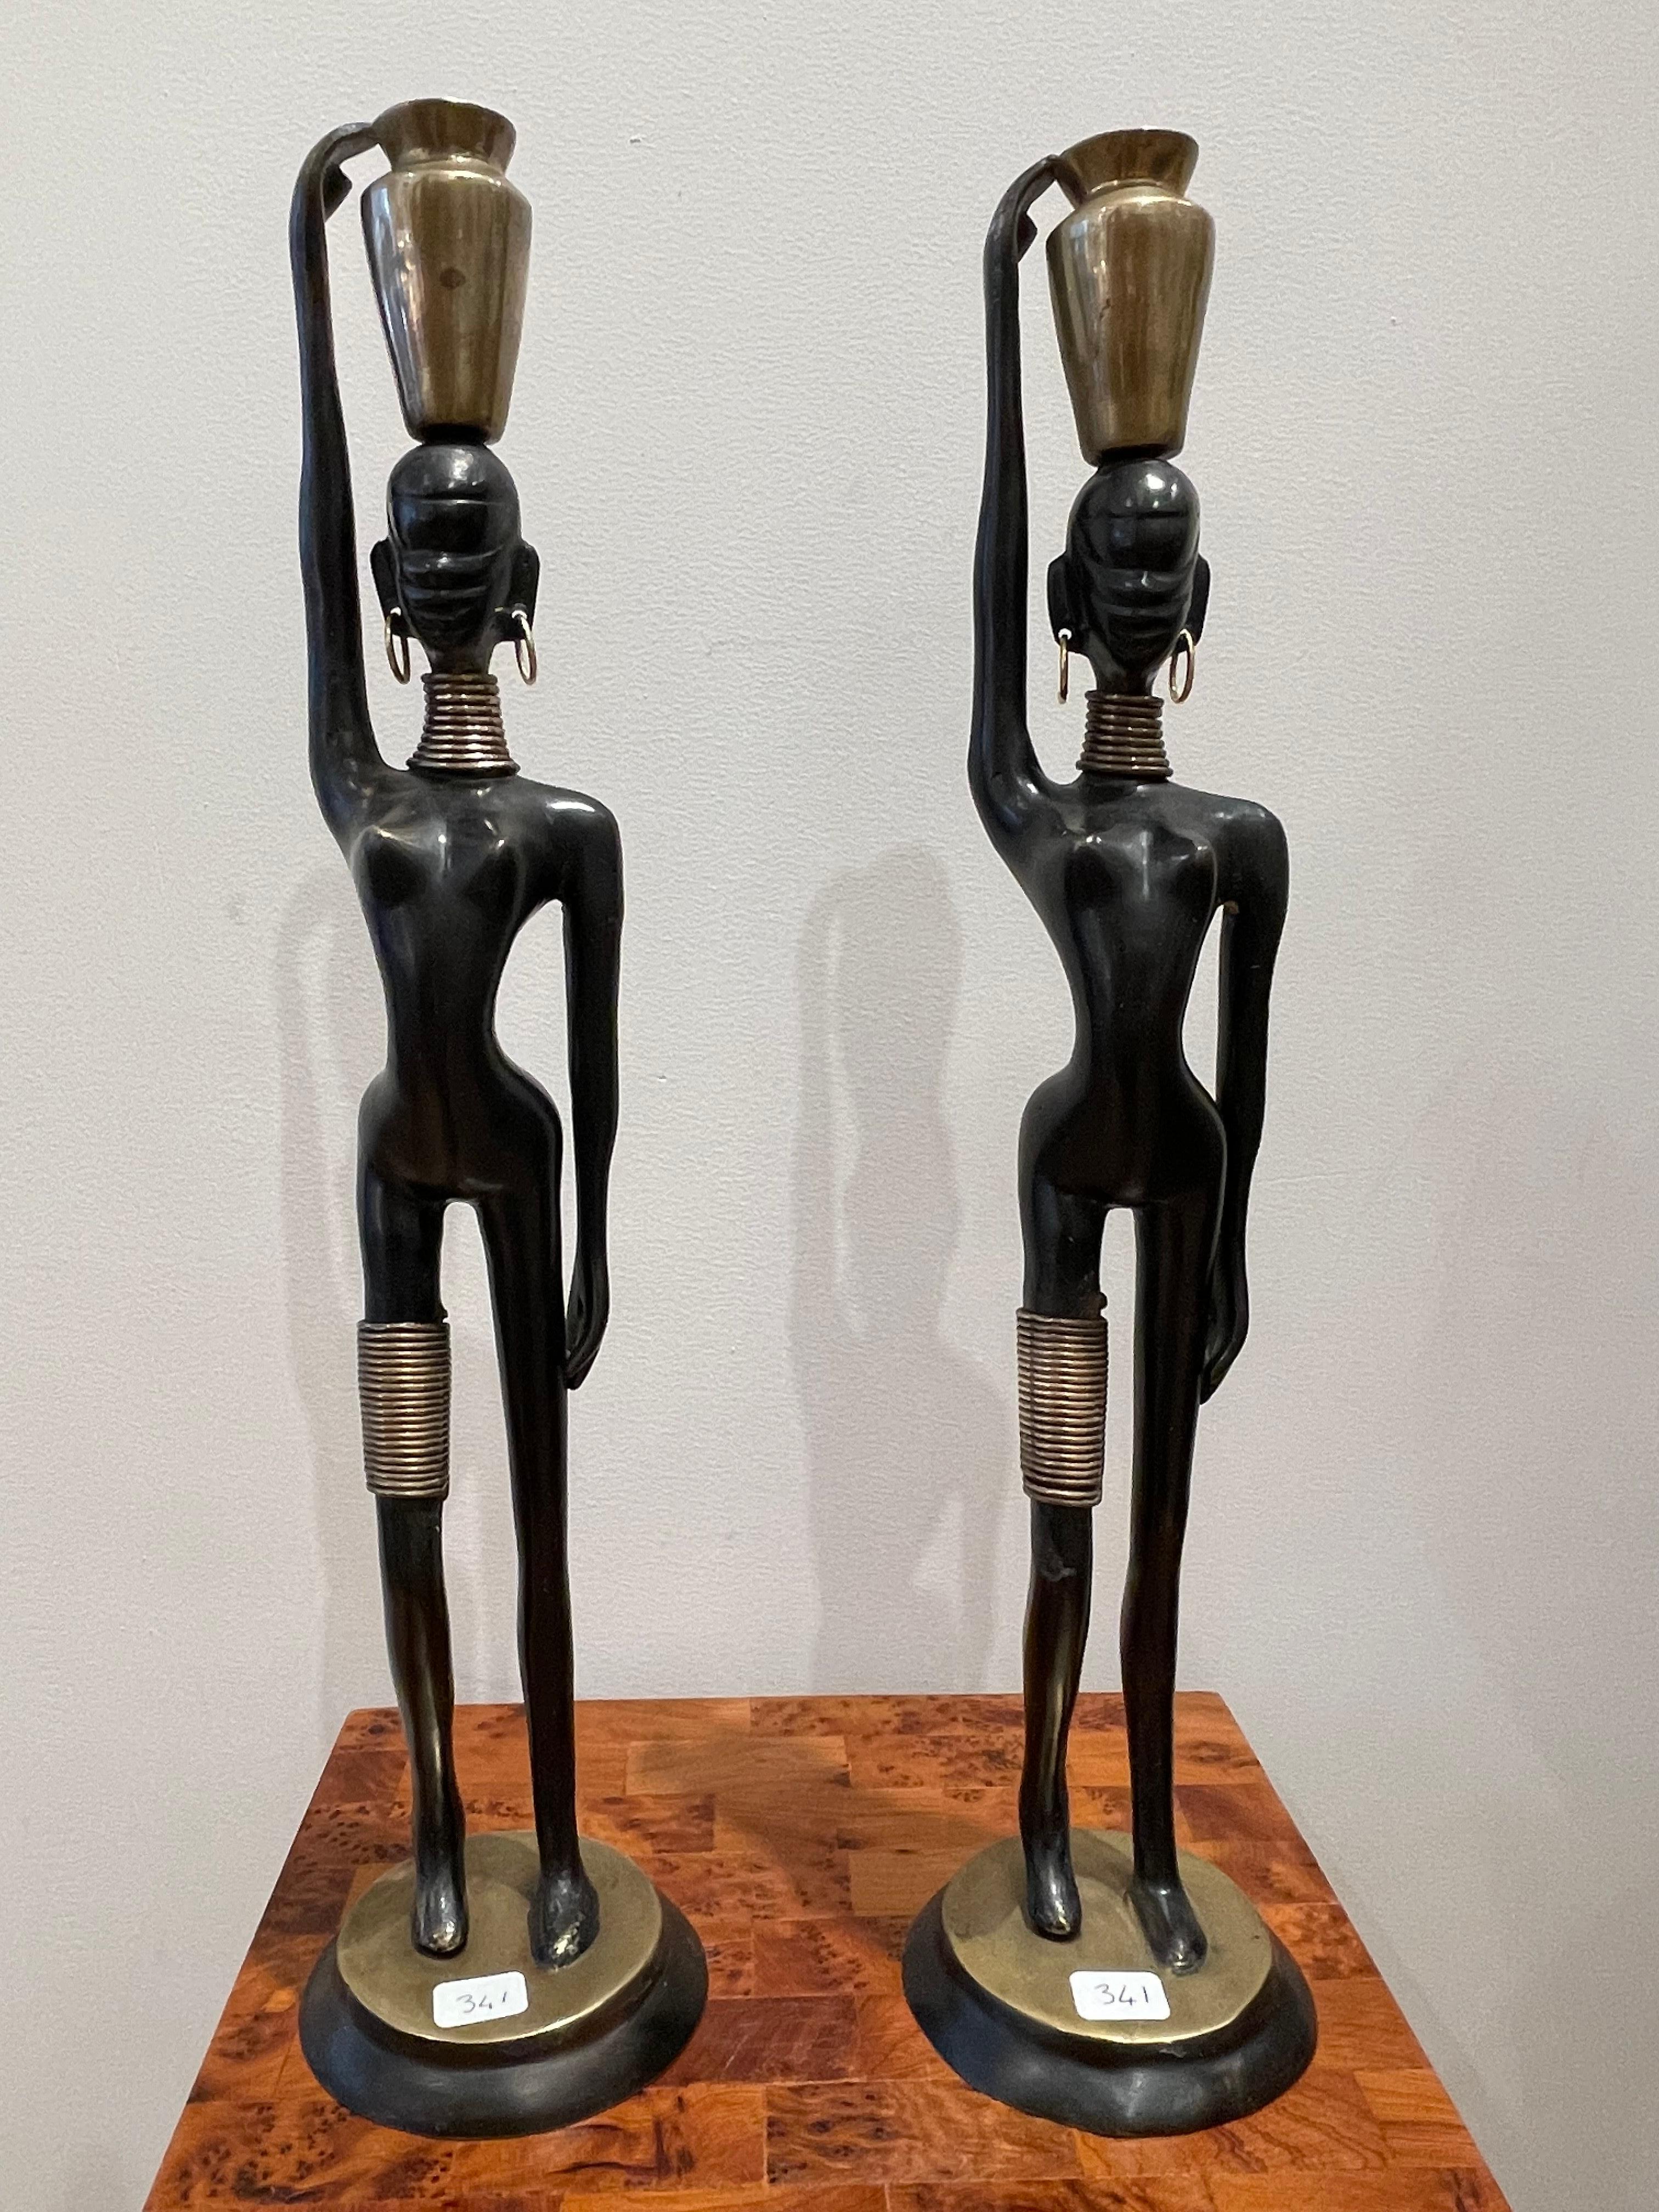 Stunning pair of African lady carrying water, in the style of Karl Hagenauer 1970’s,
Bronze with double black and gilt patina,
Dimensions : 45 cm / 17.72 inches
Stunning pair of African women carrying water. The woman's body is stylized with elegant